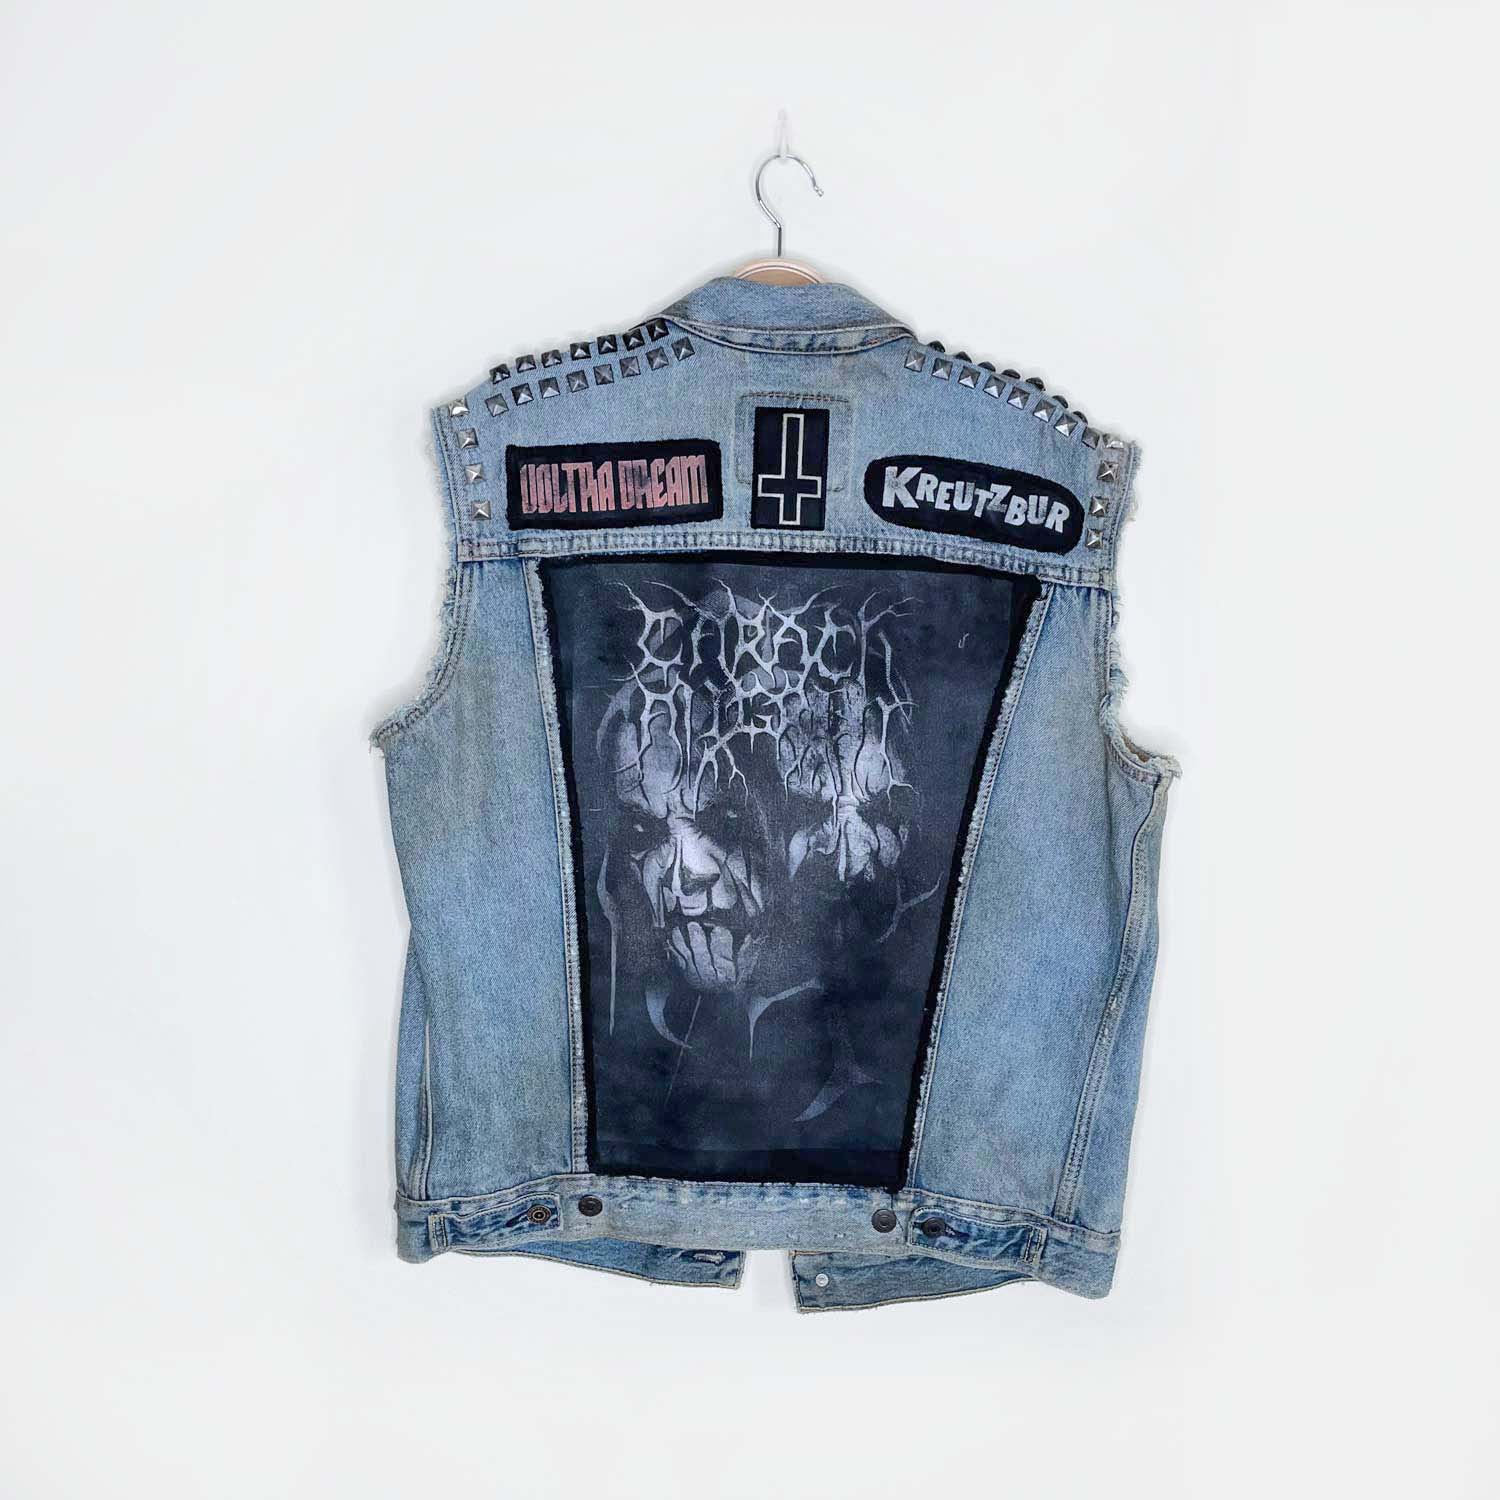 Thrift and Vintage Levi's Jeans and Trucker Jackets